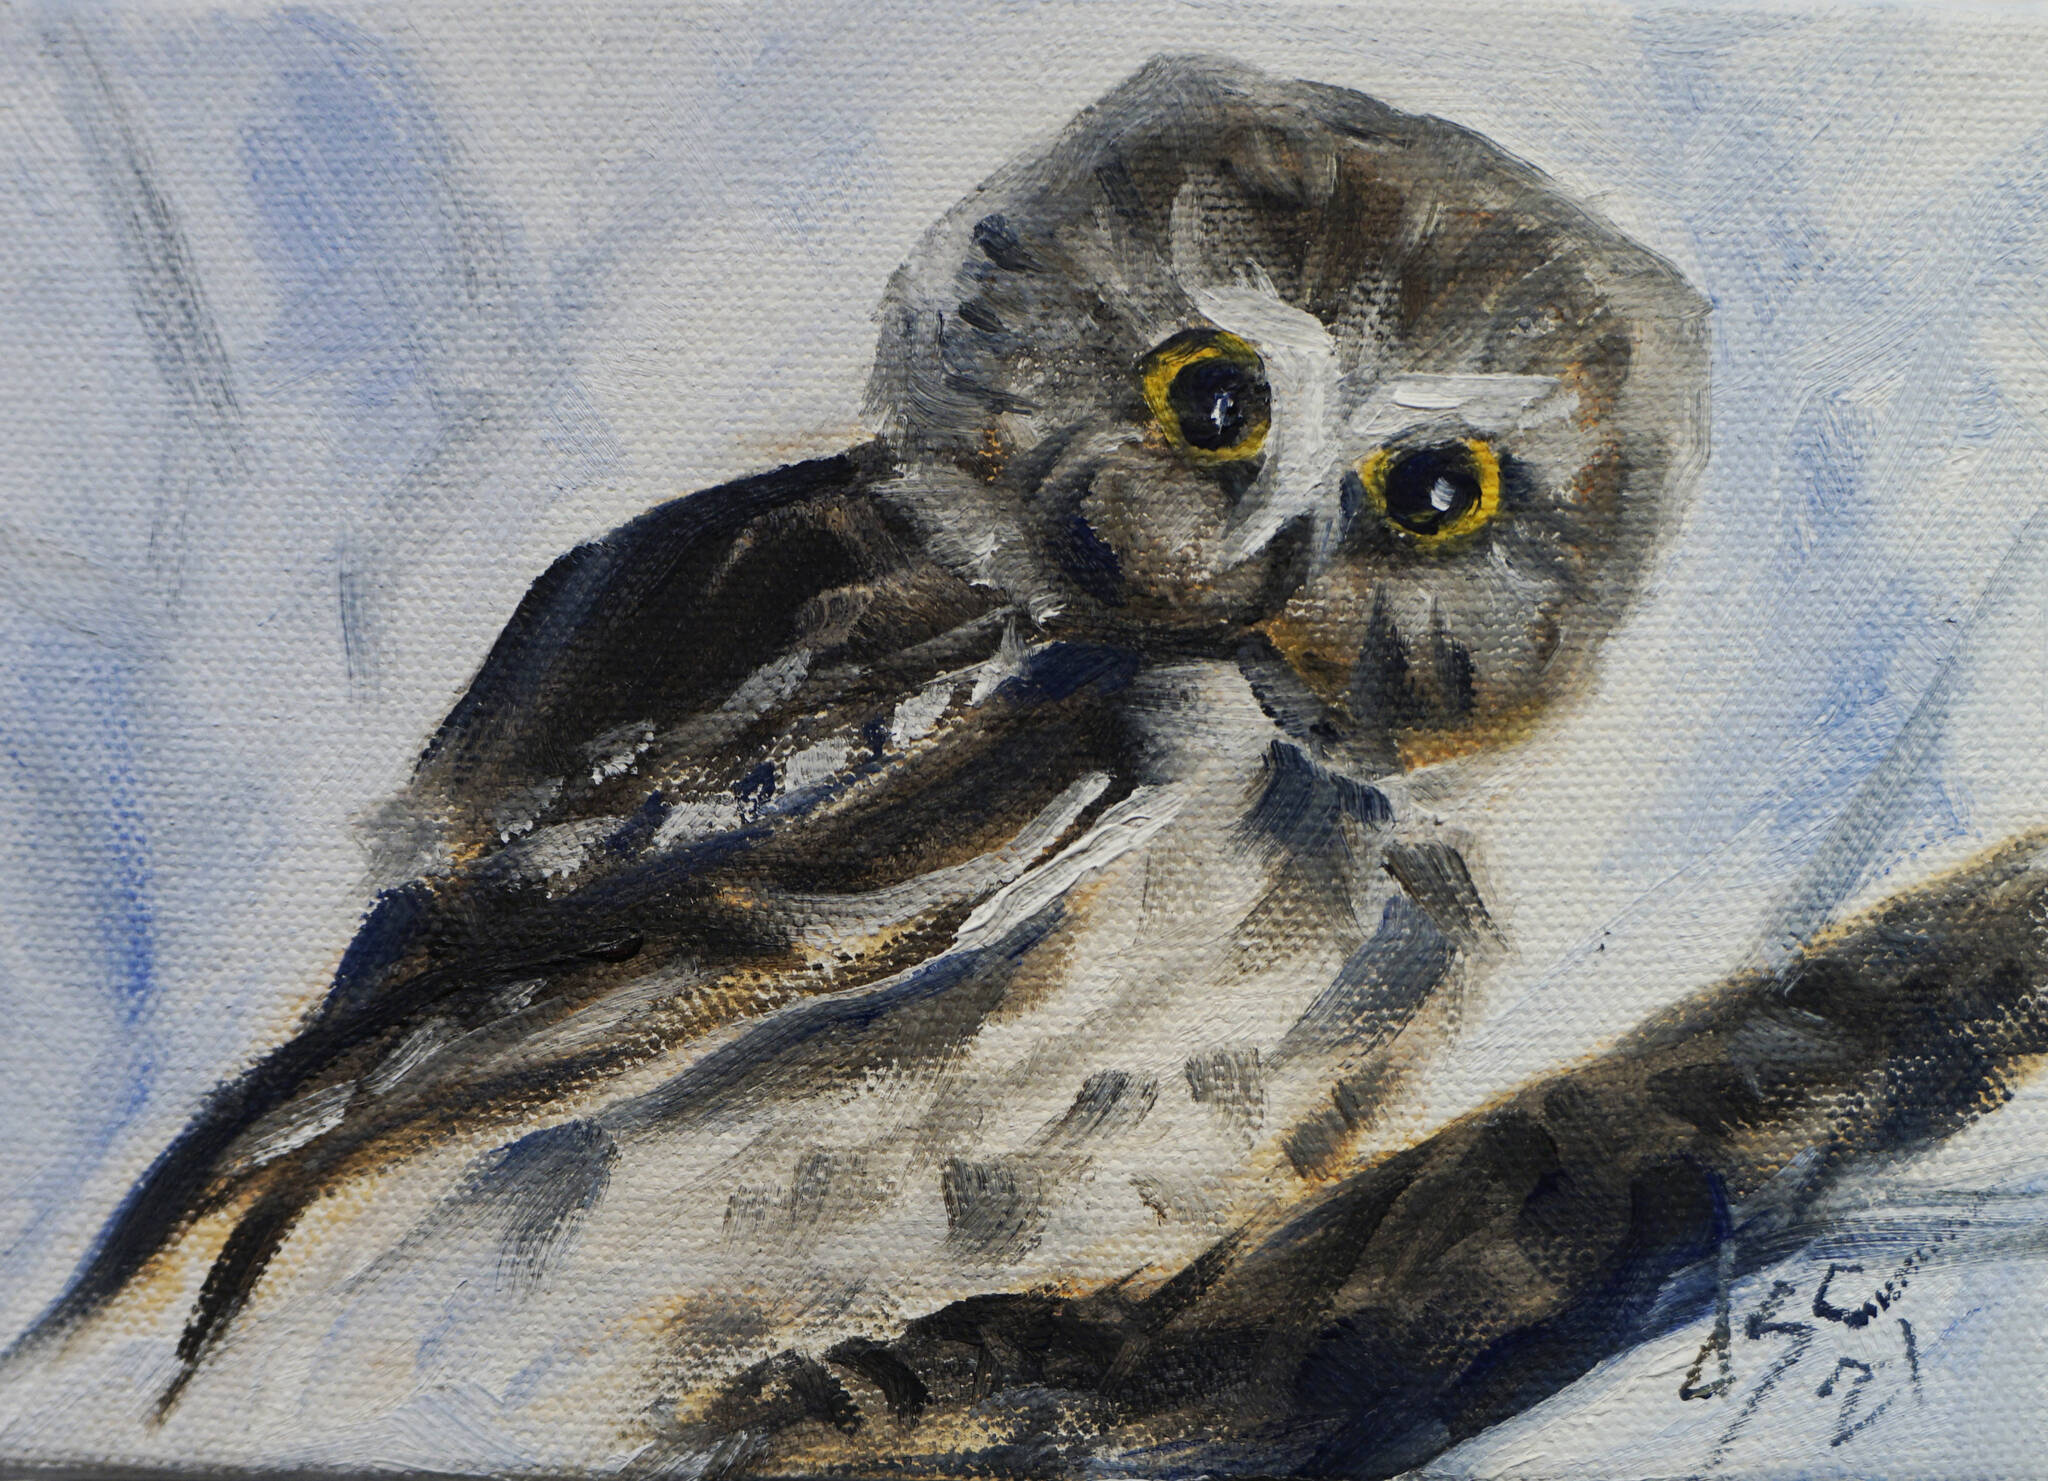 Dianne Spence-Chorman’s “Saw-Whet Owl” is one of the works showing in the Homer Council on the Arts “Fun wtih 5x7” show through Dec. 22, 2021, at the gallery in Homer, Alaska. (Photo by Michael Armstrong/Homer News)